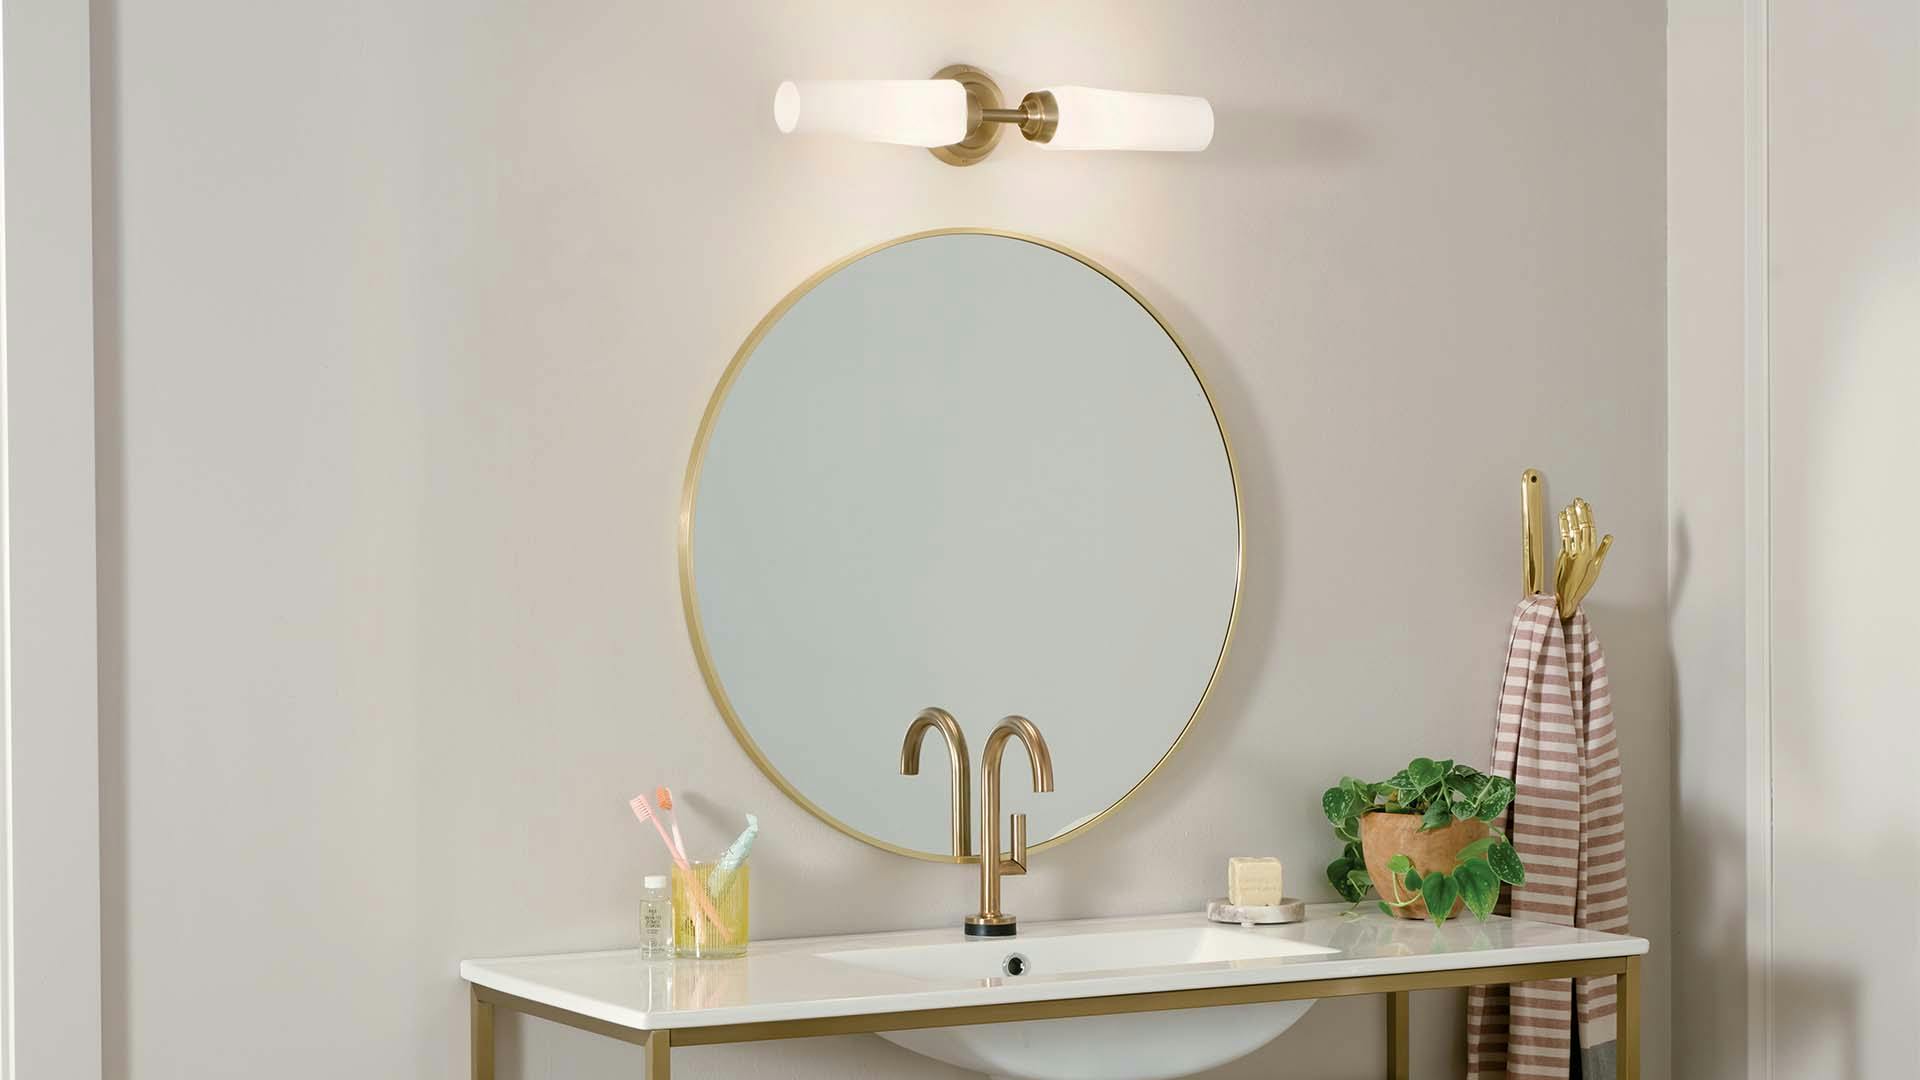 2 light Truby Sconce mounted over mirror and vanity